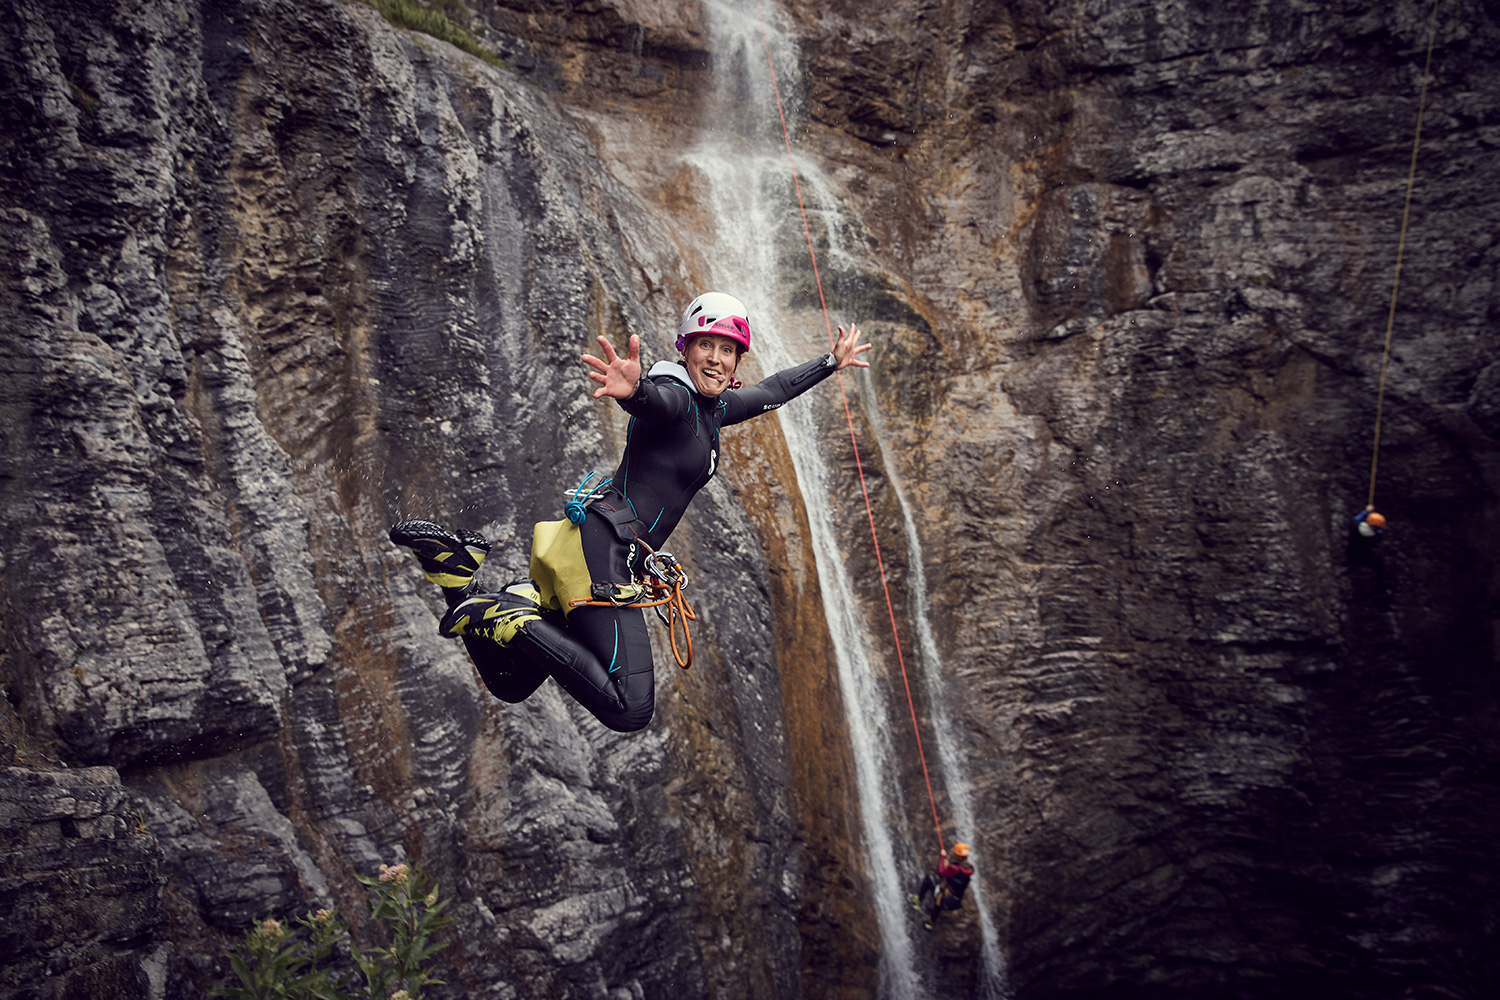 Stunt woman Kim jumping into a pool while canyoning in Austria